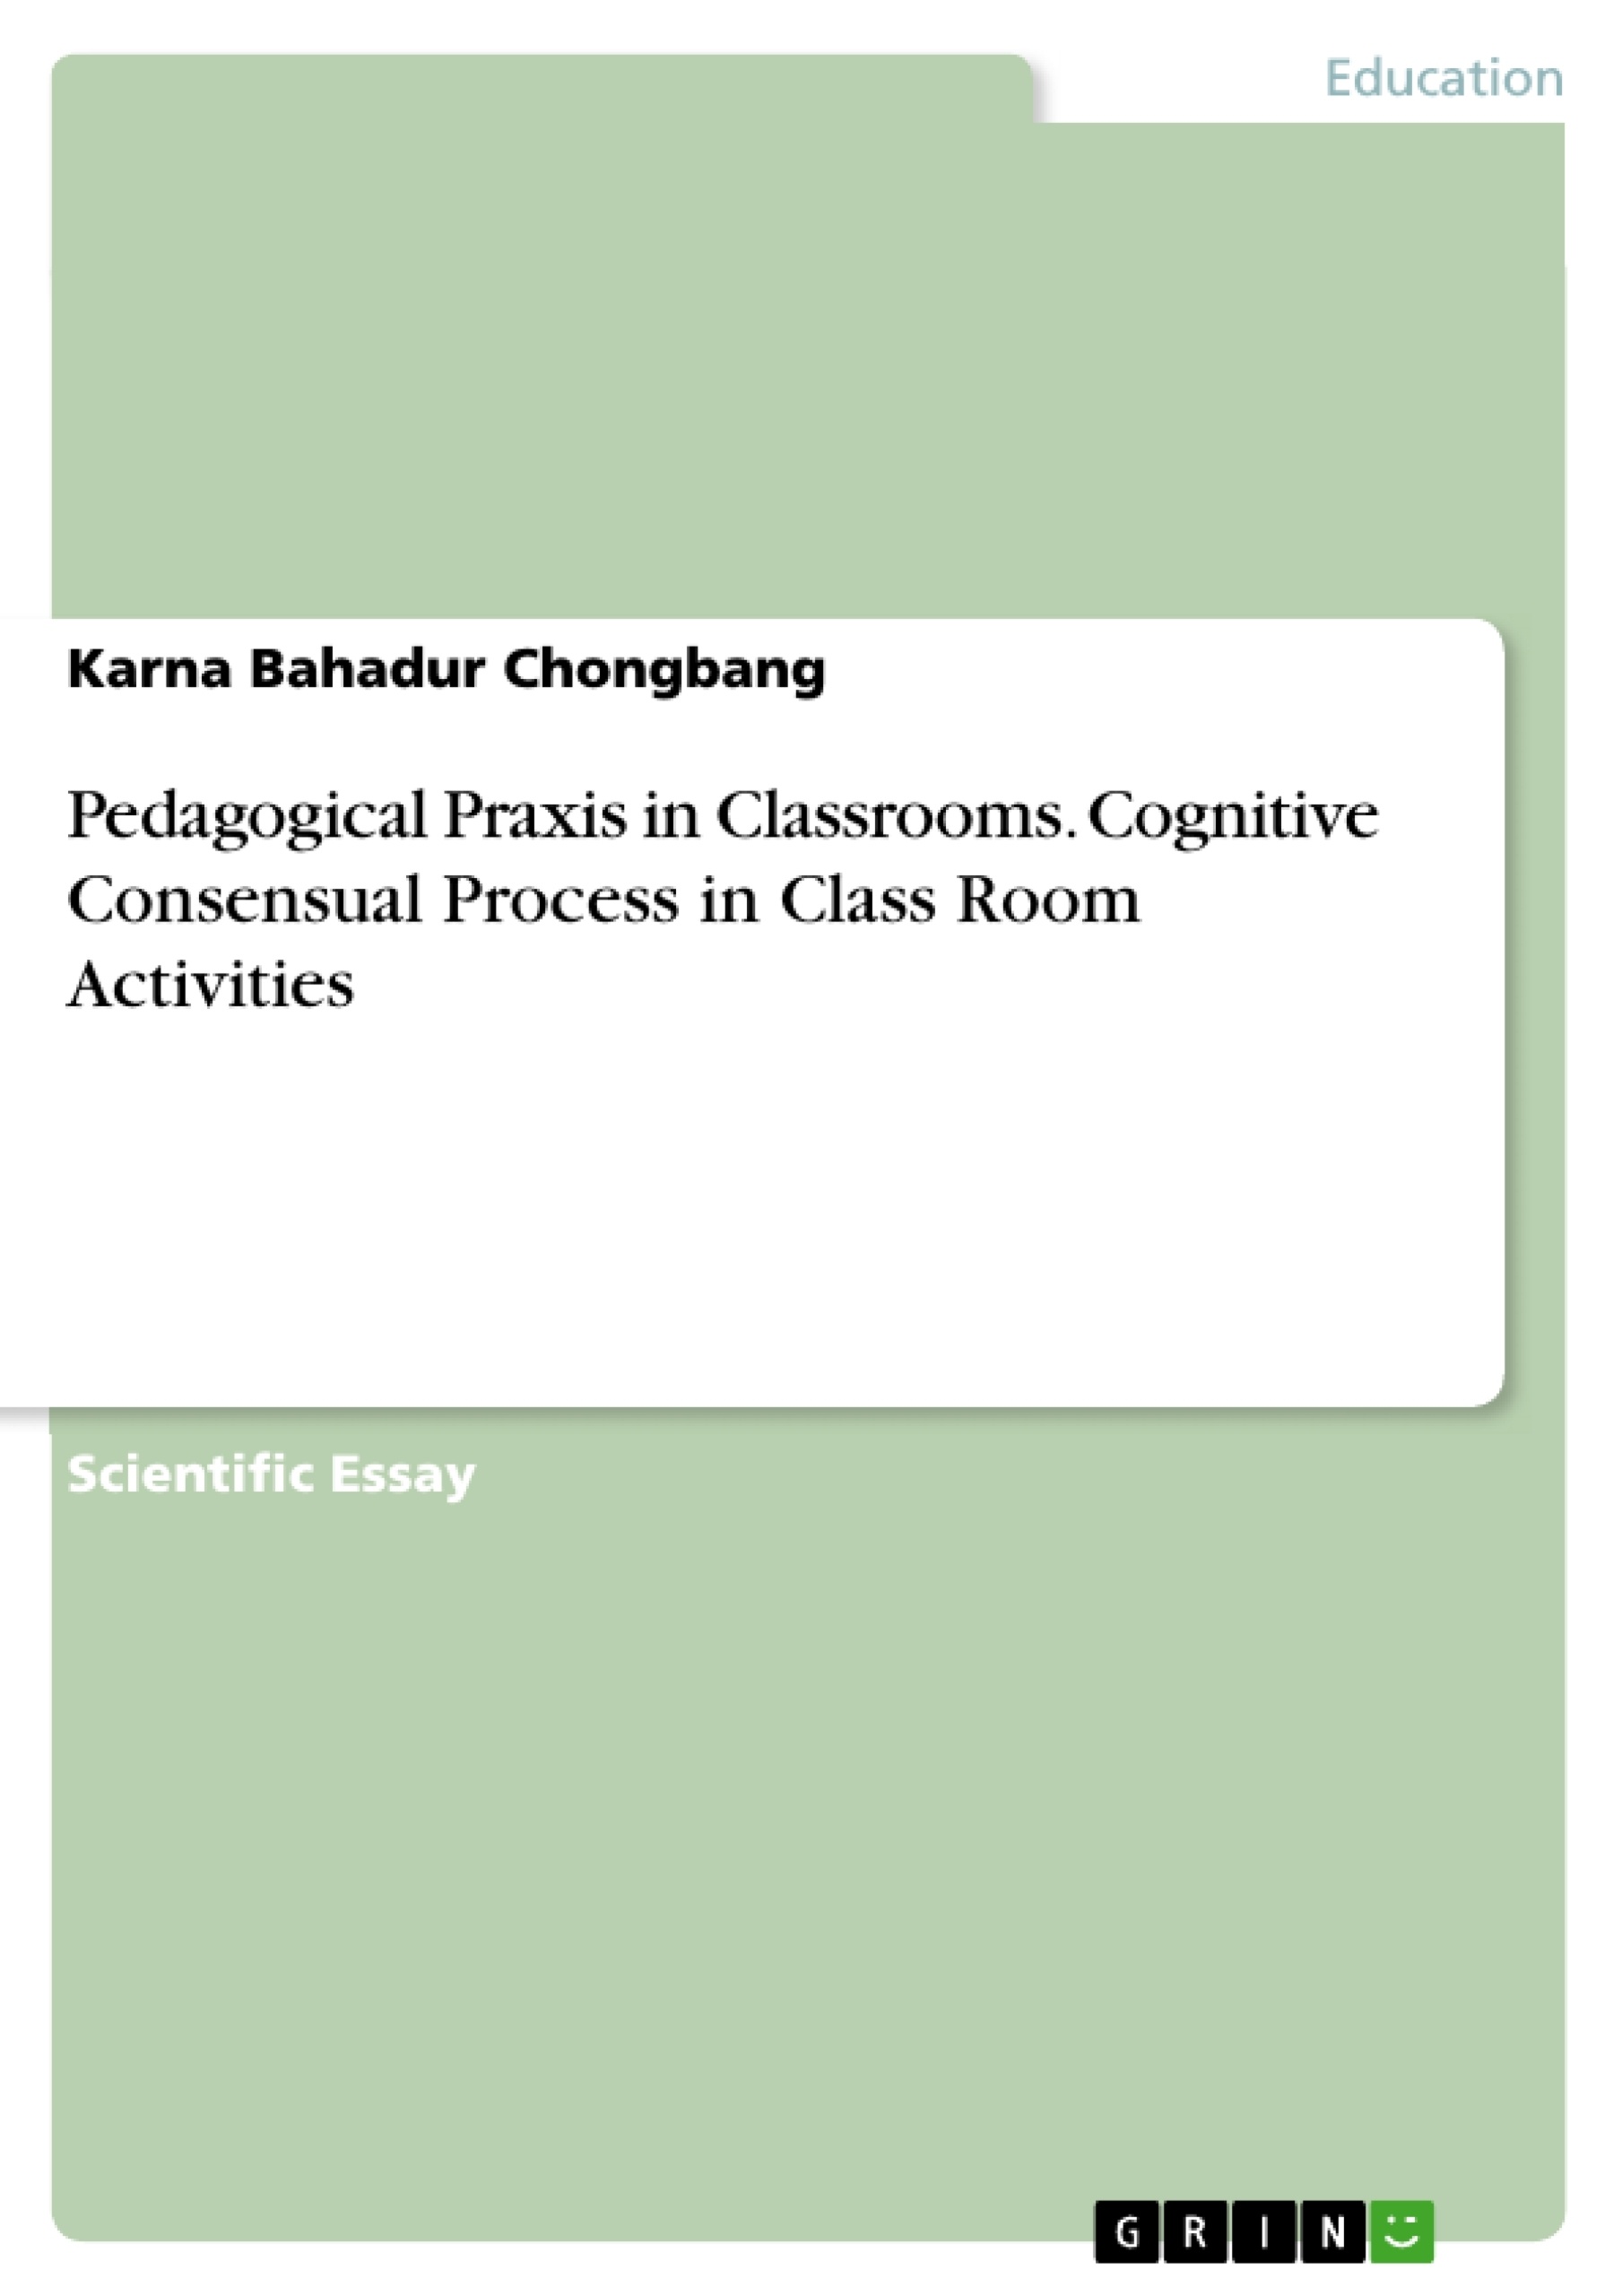 Título: Pedagogical Praxis in Classrooms. Cognitive Consensual Process in Class Room Activities